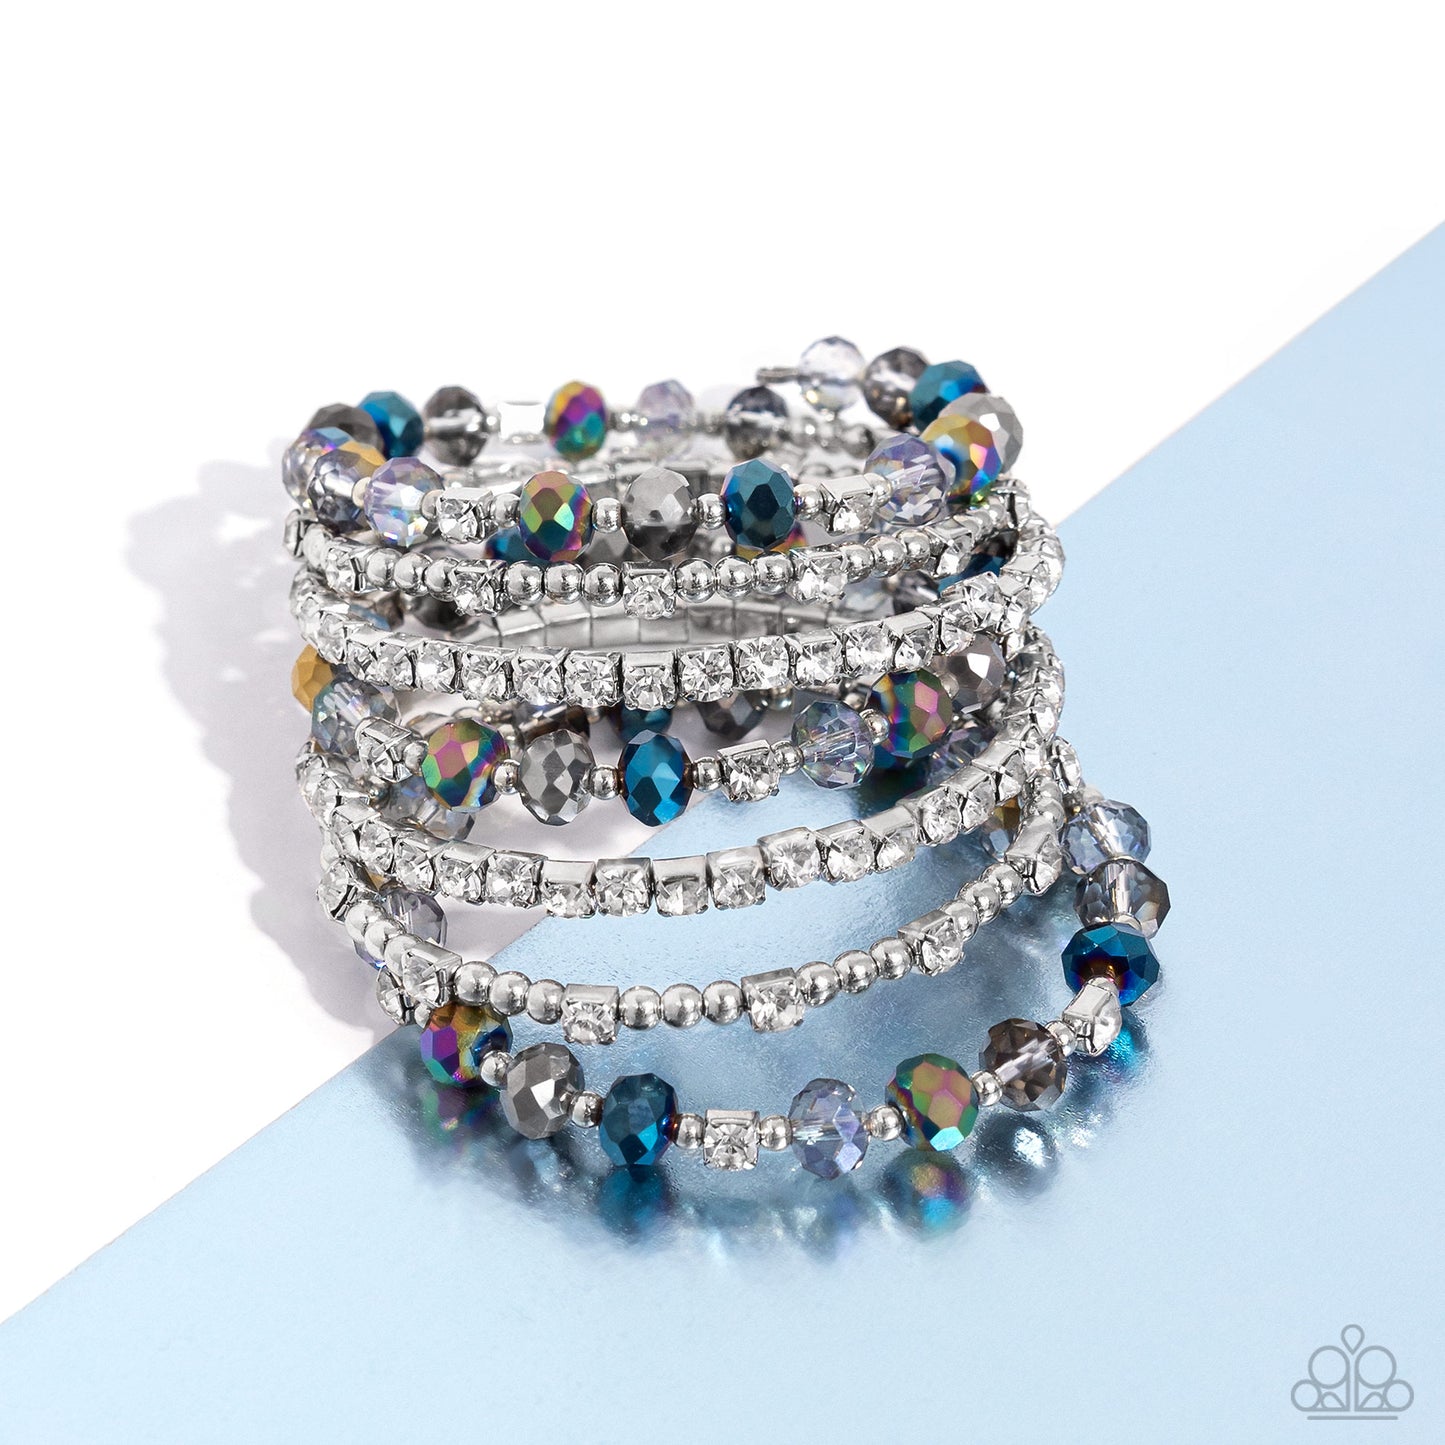 Threaded along a coiled wire, silver beads, white rhinestones in silver square fittings, and oil spill, blue, silver, and transparent faceted beads curl around the wrist, creating an eye-catching, infinity wrap-style bracelet around the wrist.